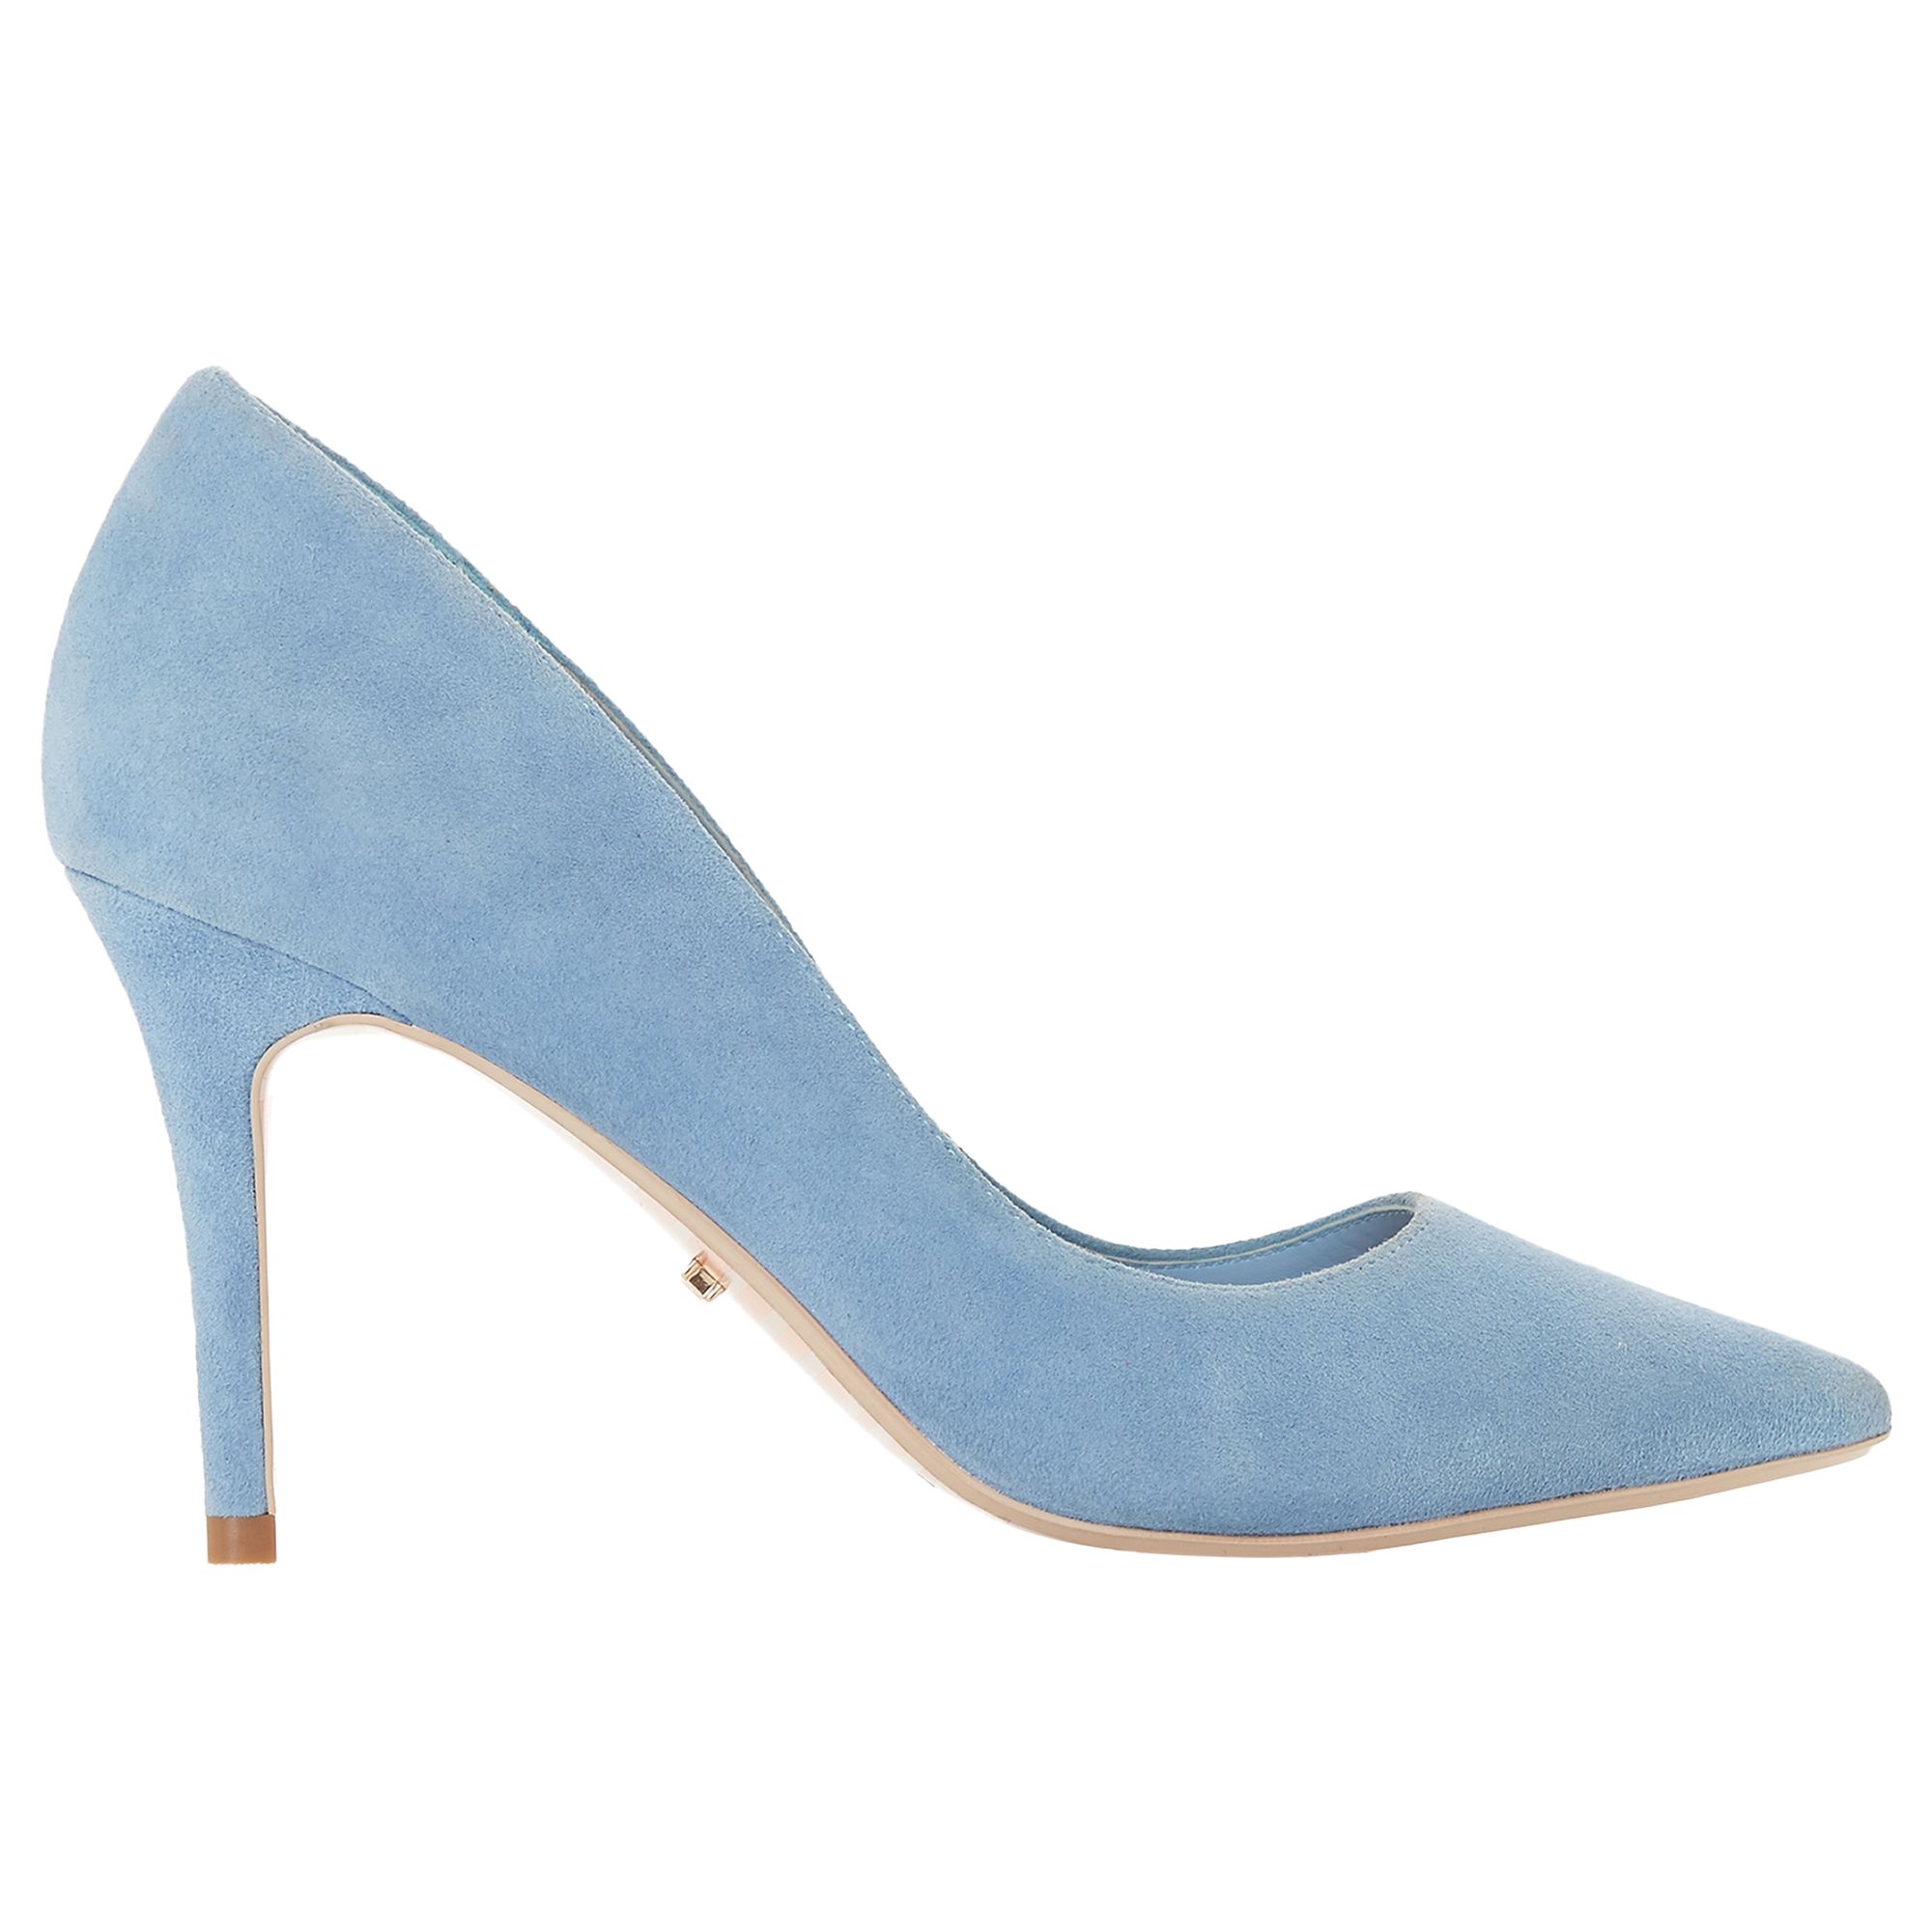 Dune Aurrora Pointed Toe Court Shoes, Blue Suede, 8